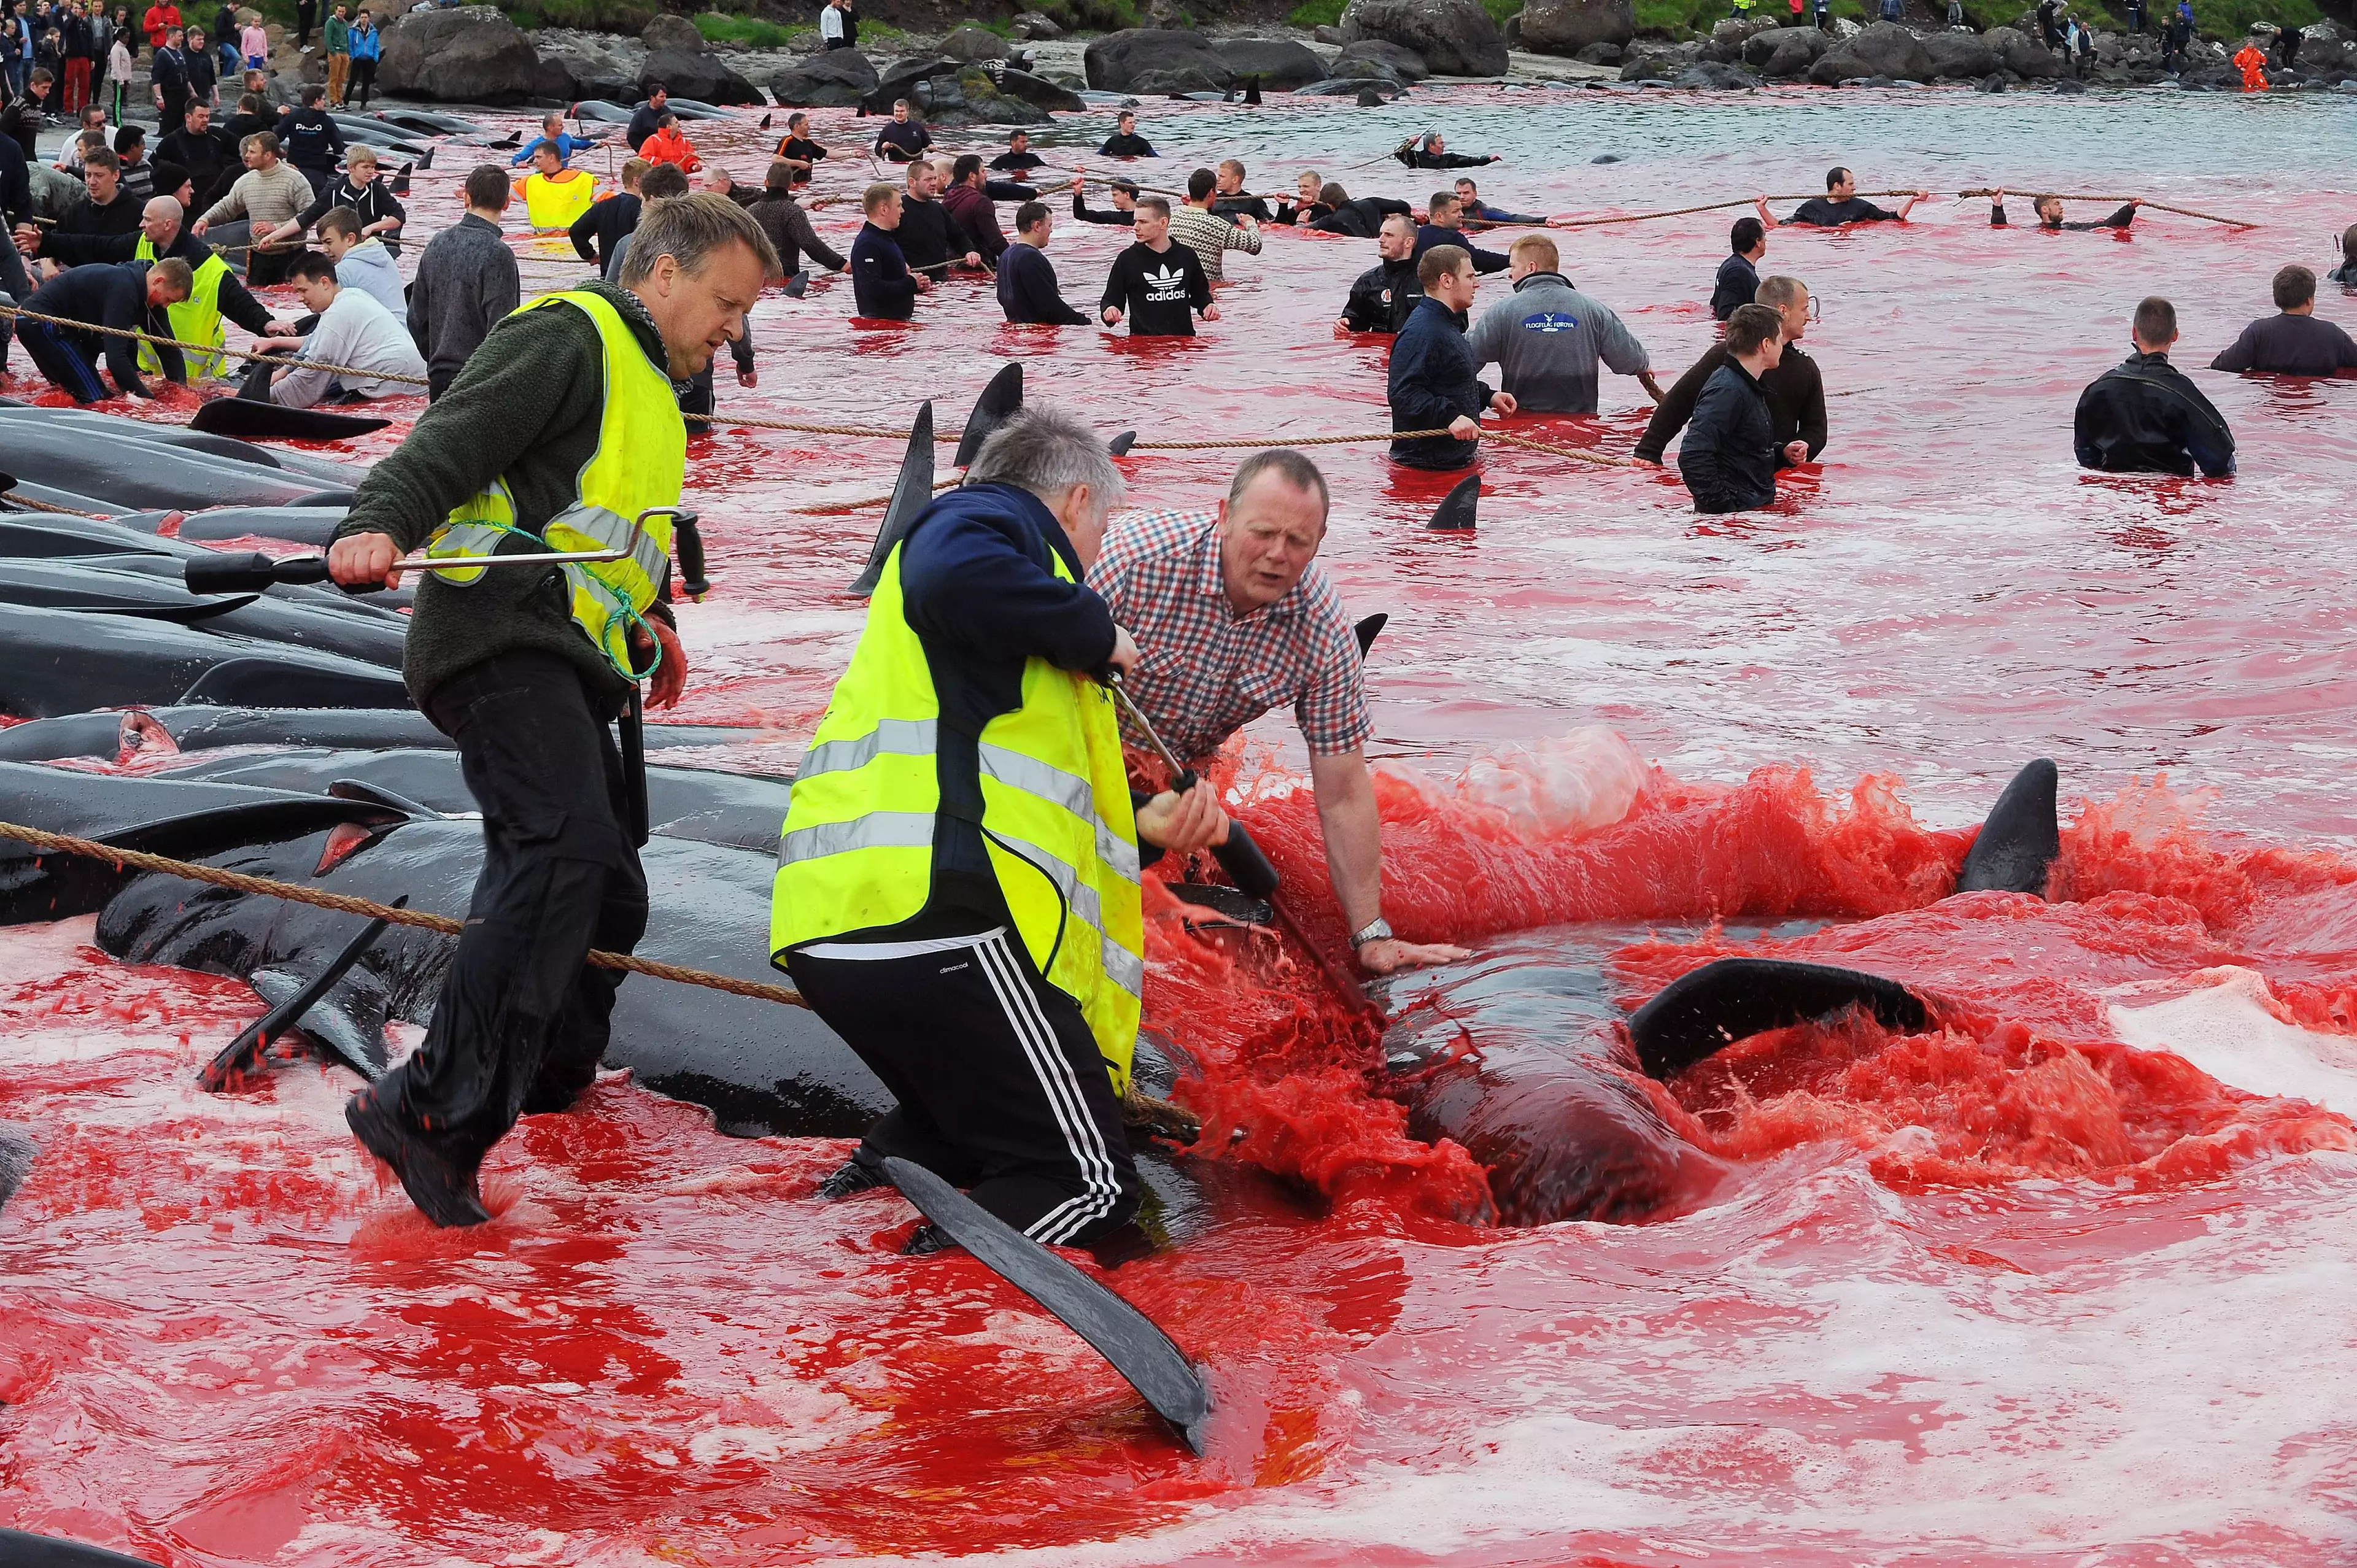 Stock picture: Every year, herds of pilot whales are slaughtered in Denmark's Faroe Islands (